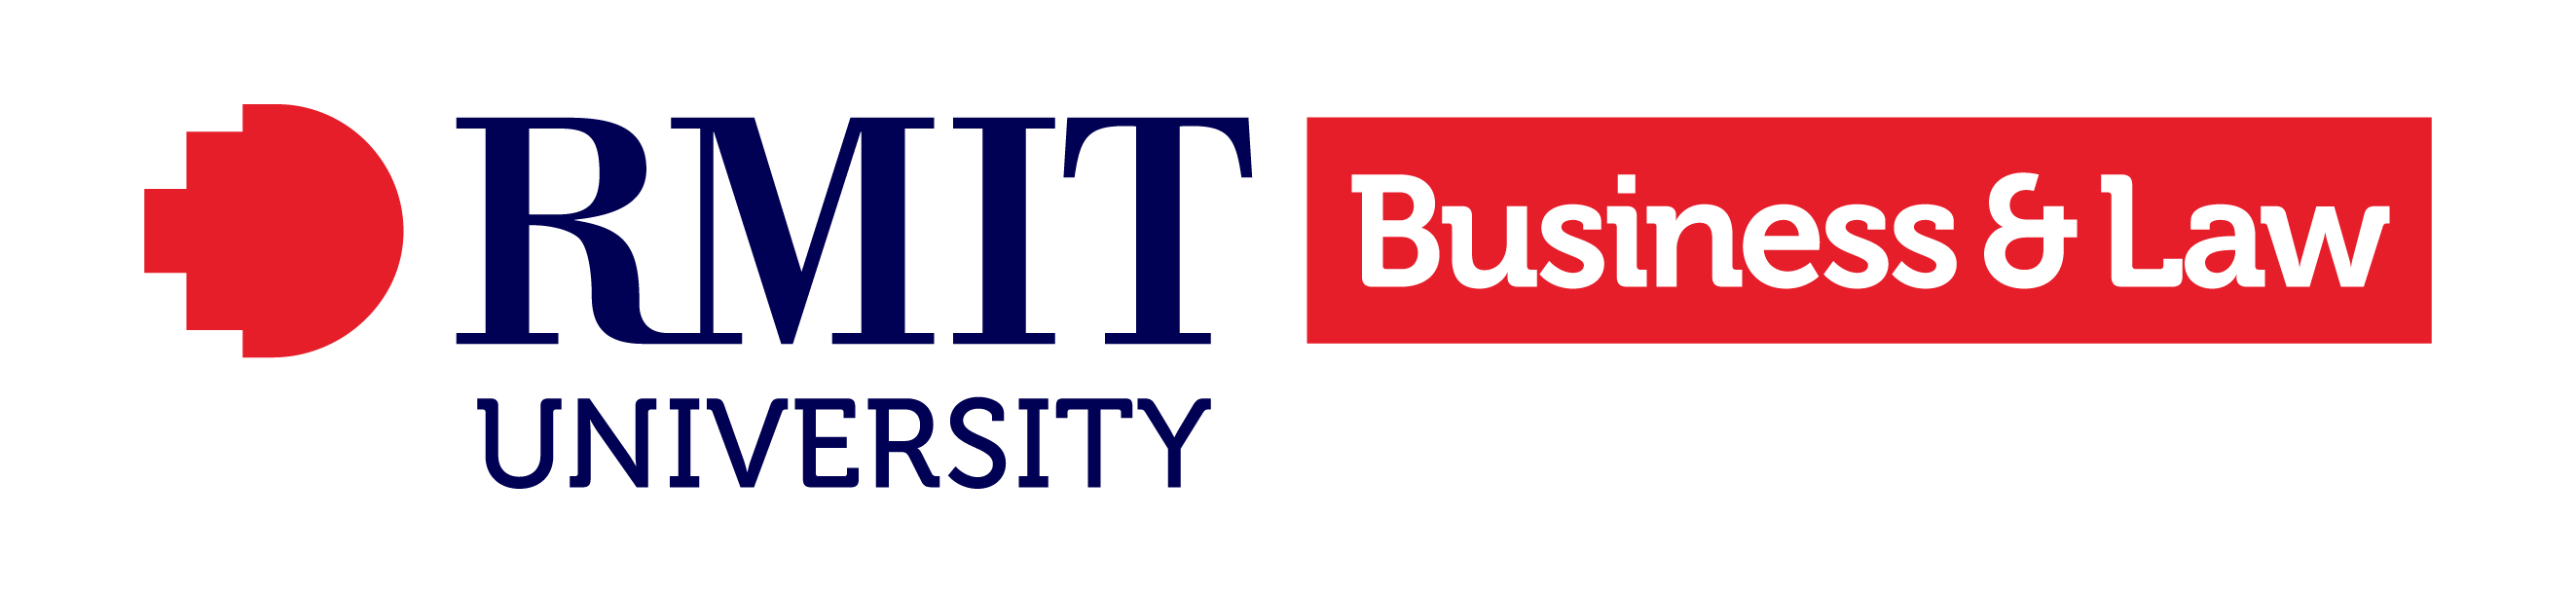 RMIT College of Business and Law logo